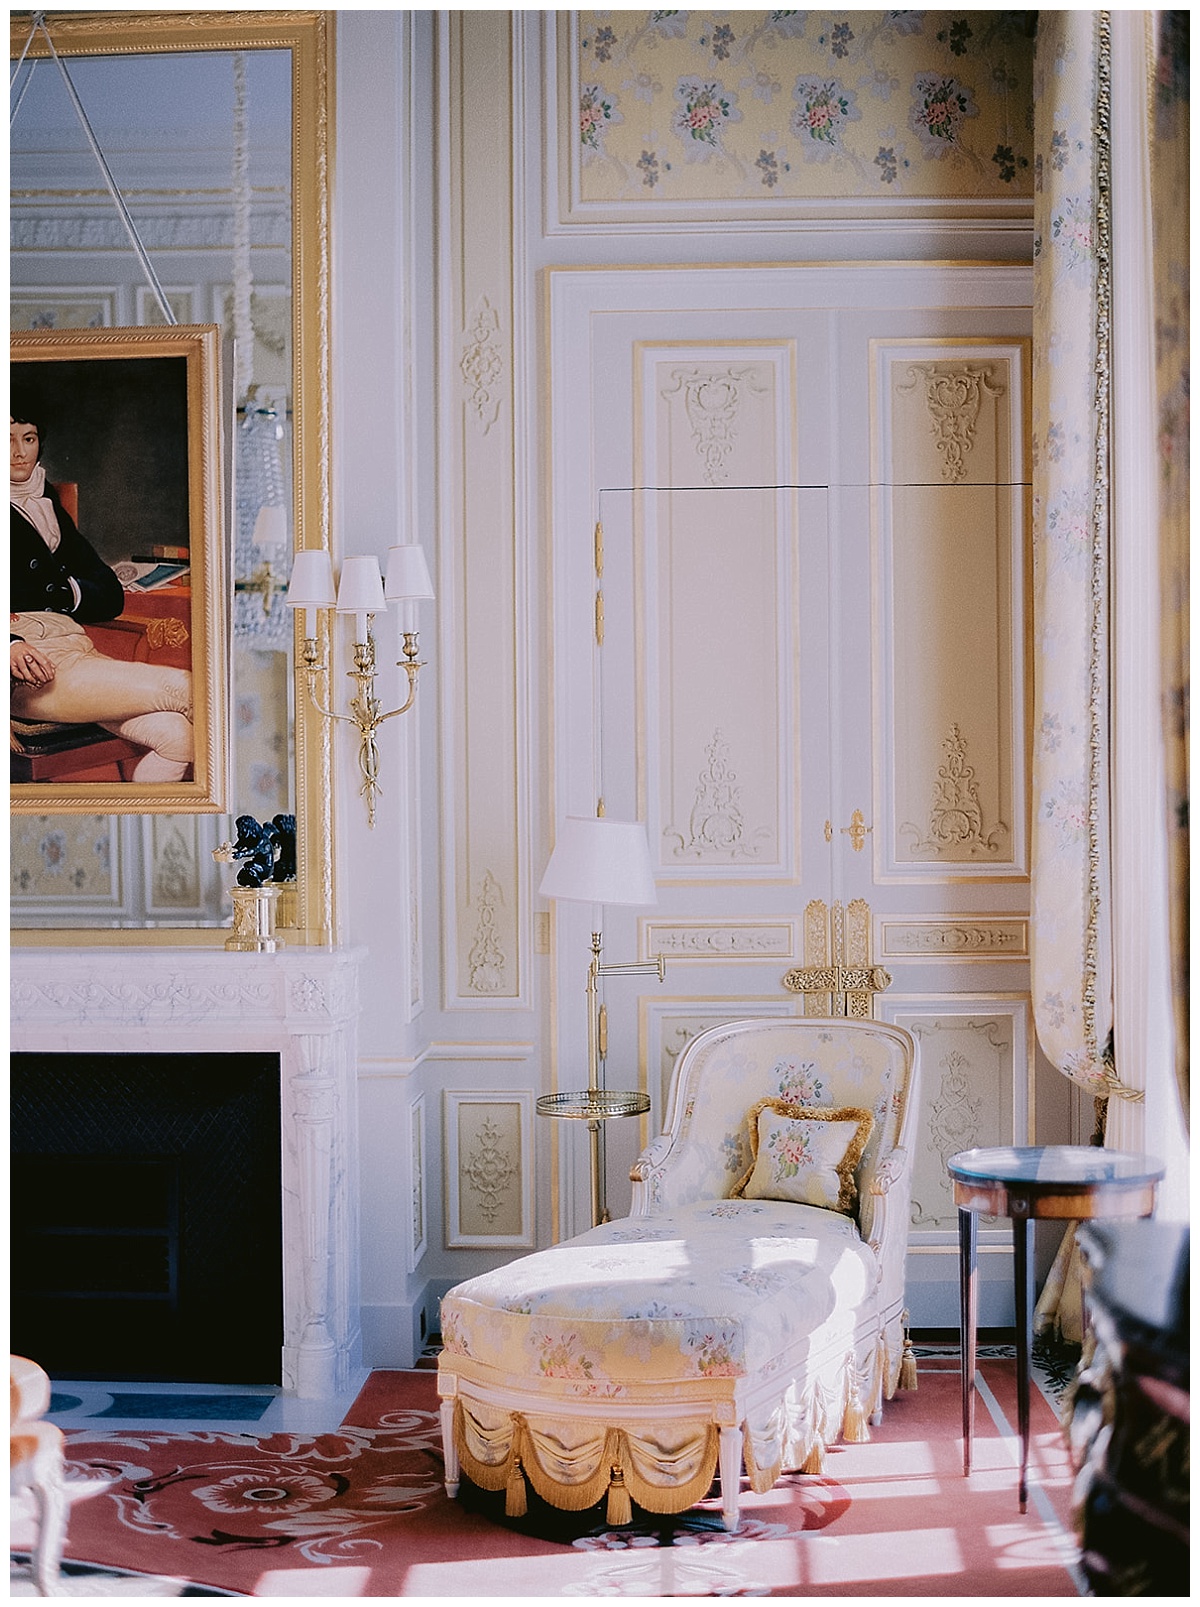 A suite of the Ritz, royal 